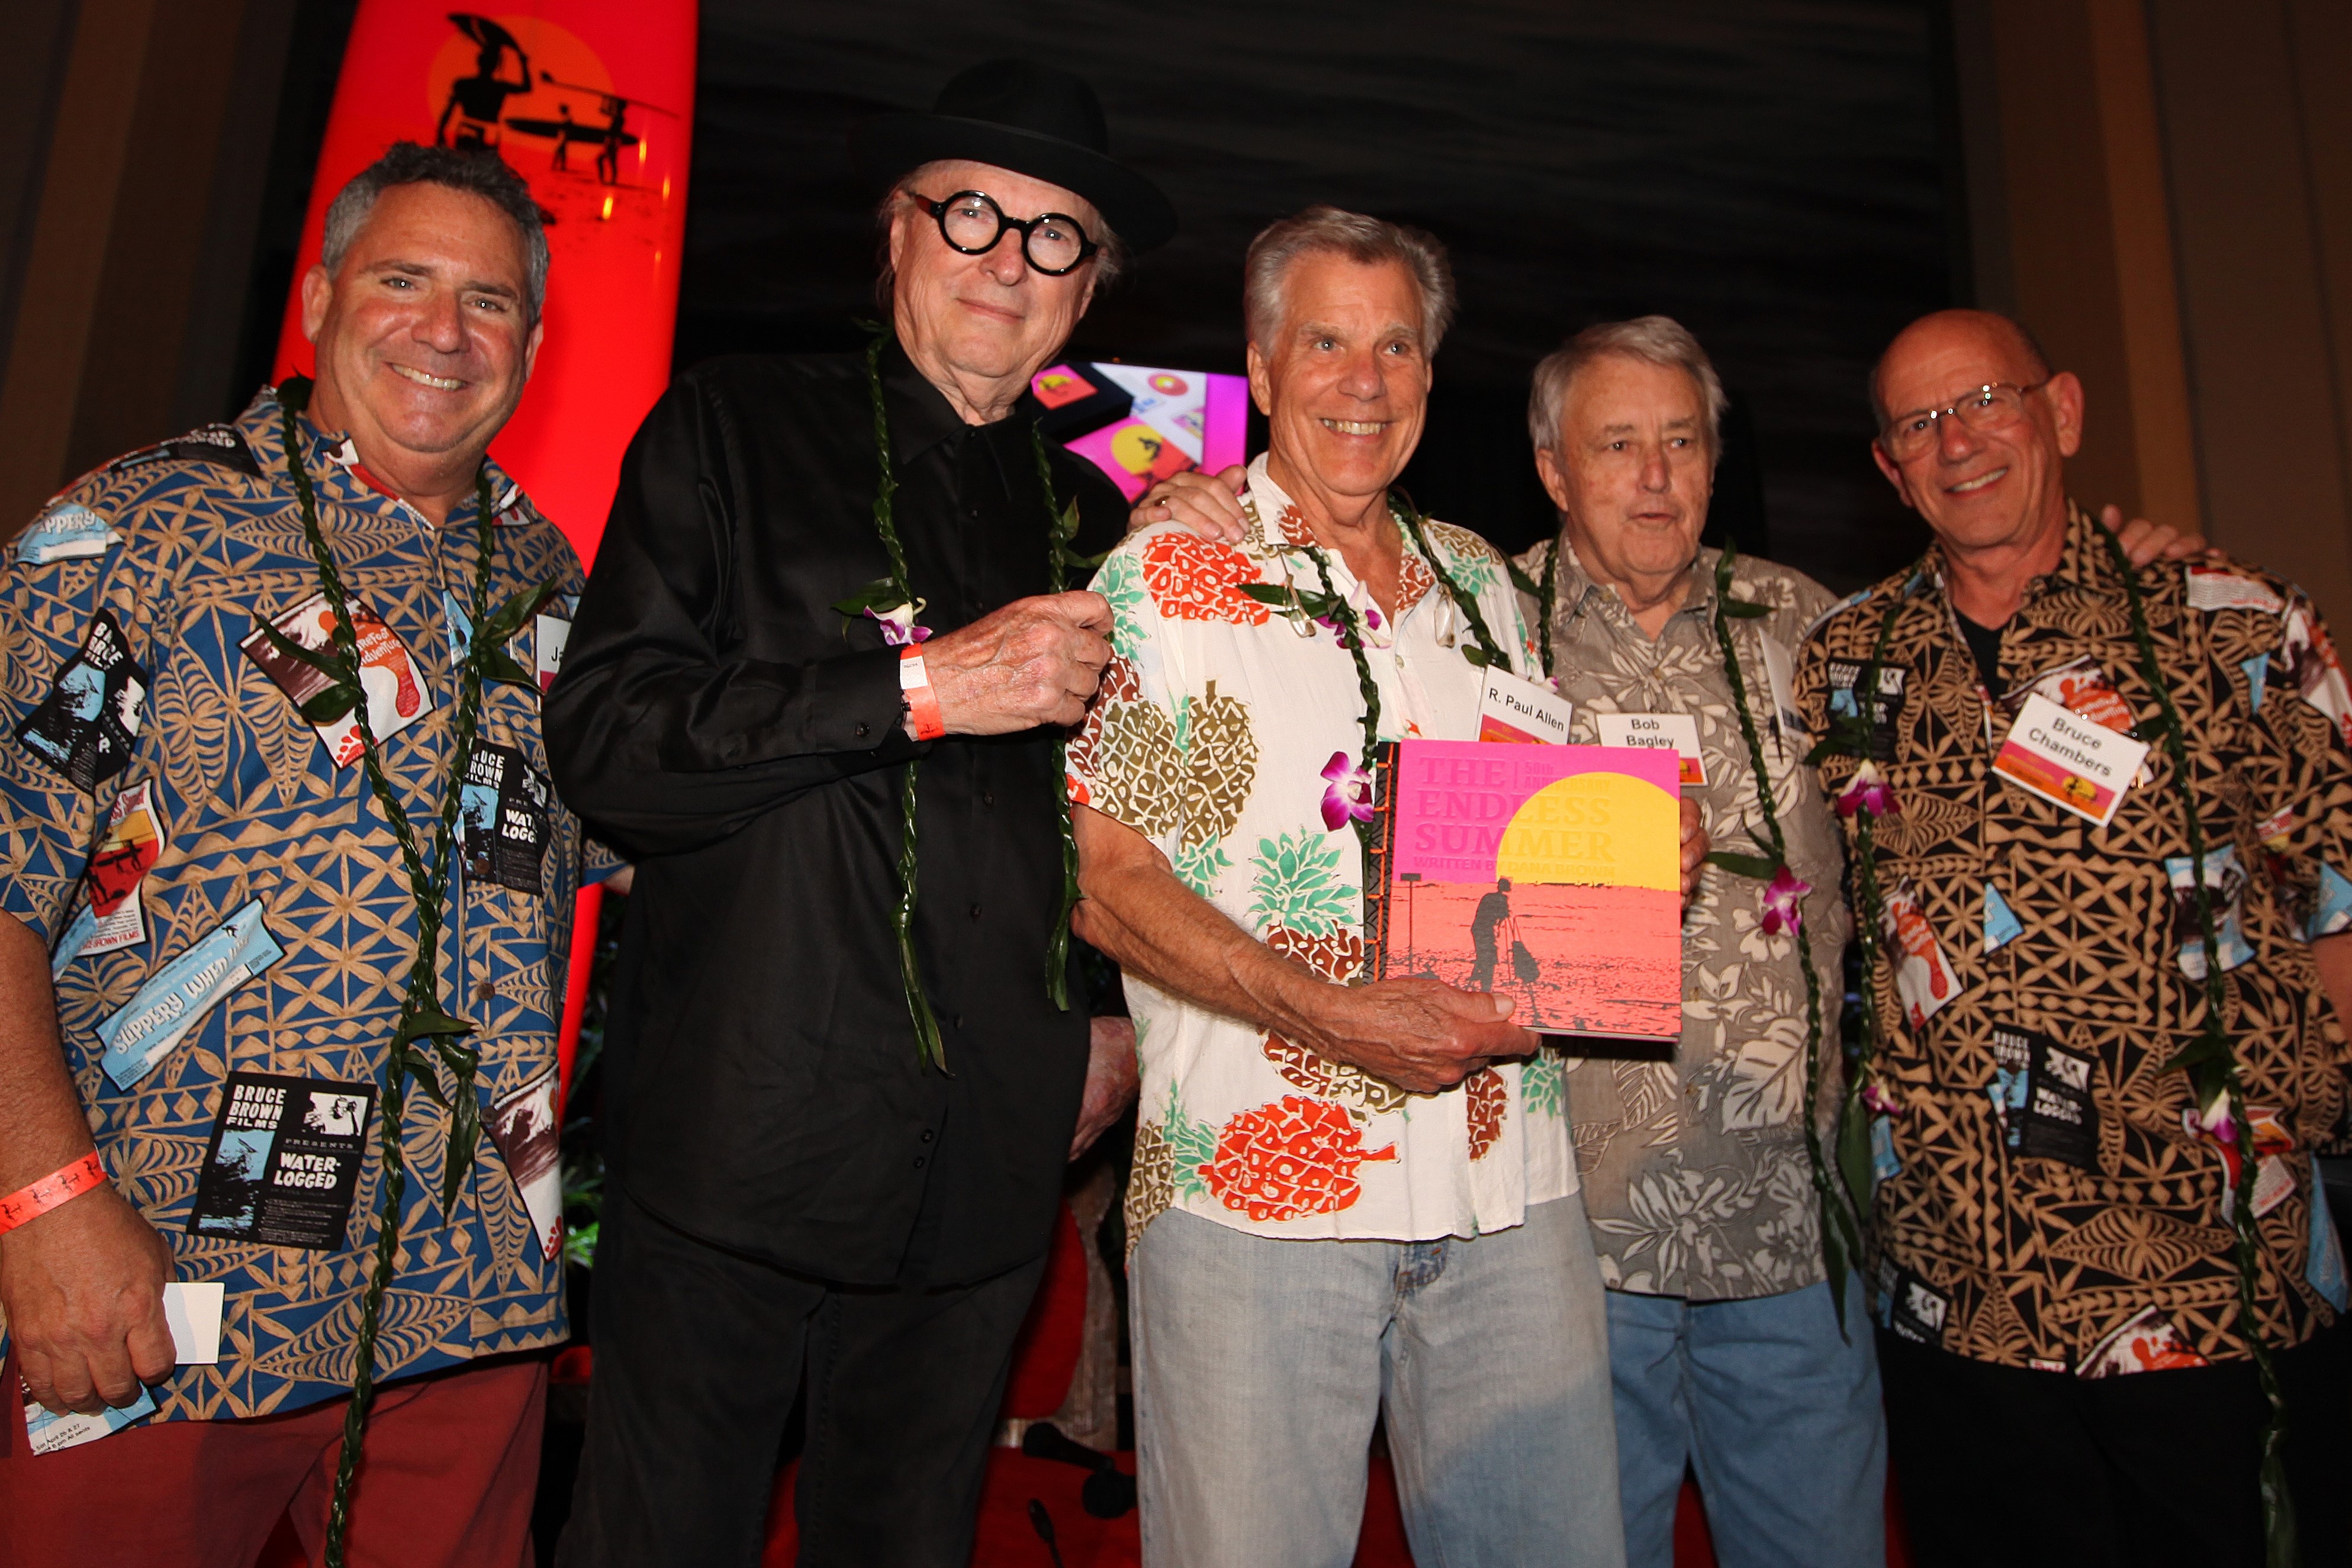 Jay Fox co-pubilisher, John Van Hamersveld, Paul Allen, Bob Bagley and Bruce Chambers co-publisher and printer of the The Endless Summer Book and Box Set at the first launch in Huntington Beach, CA.